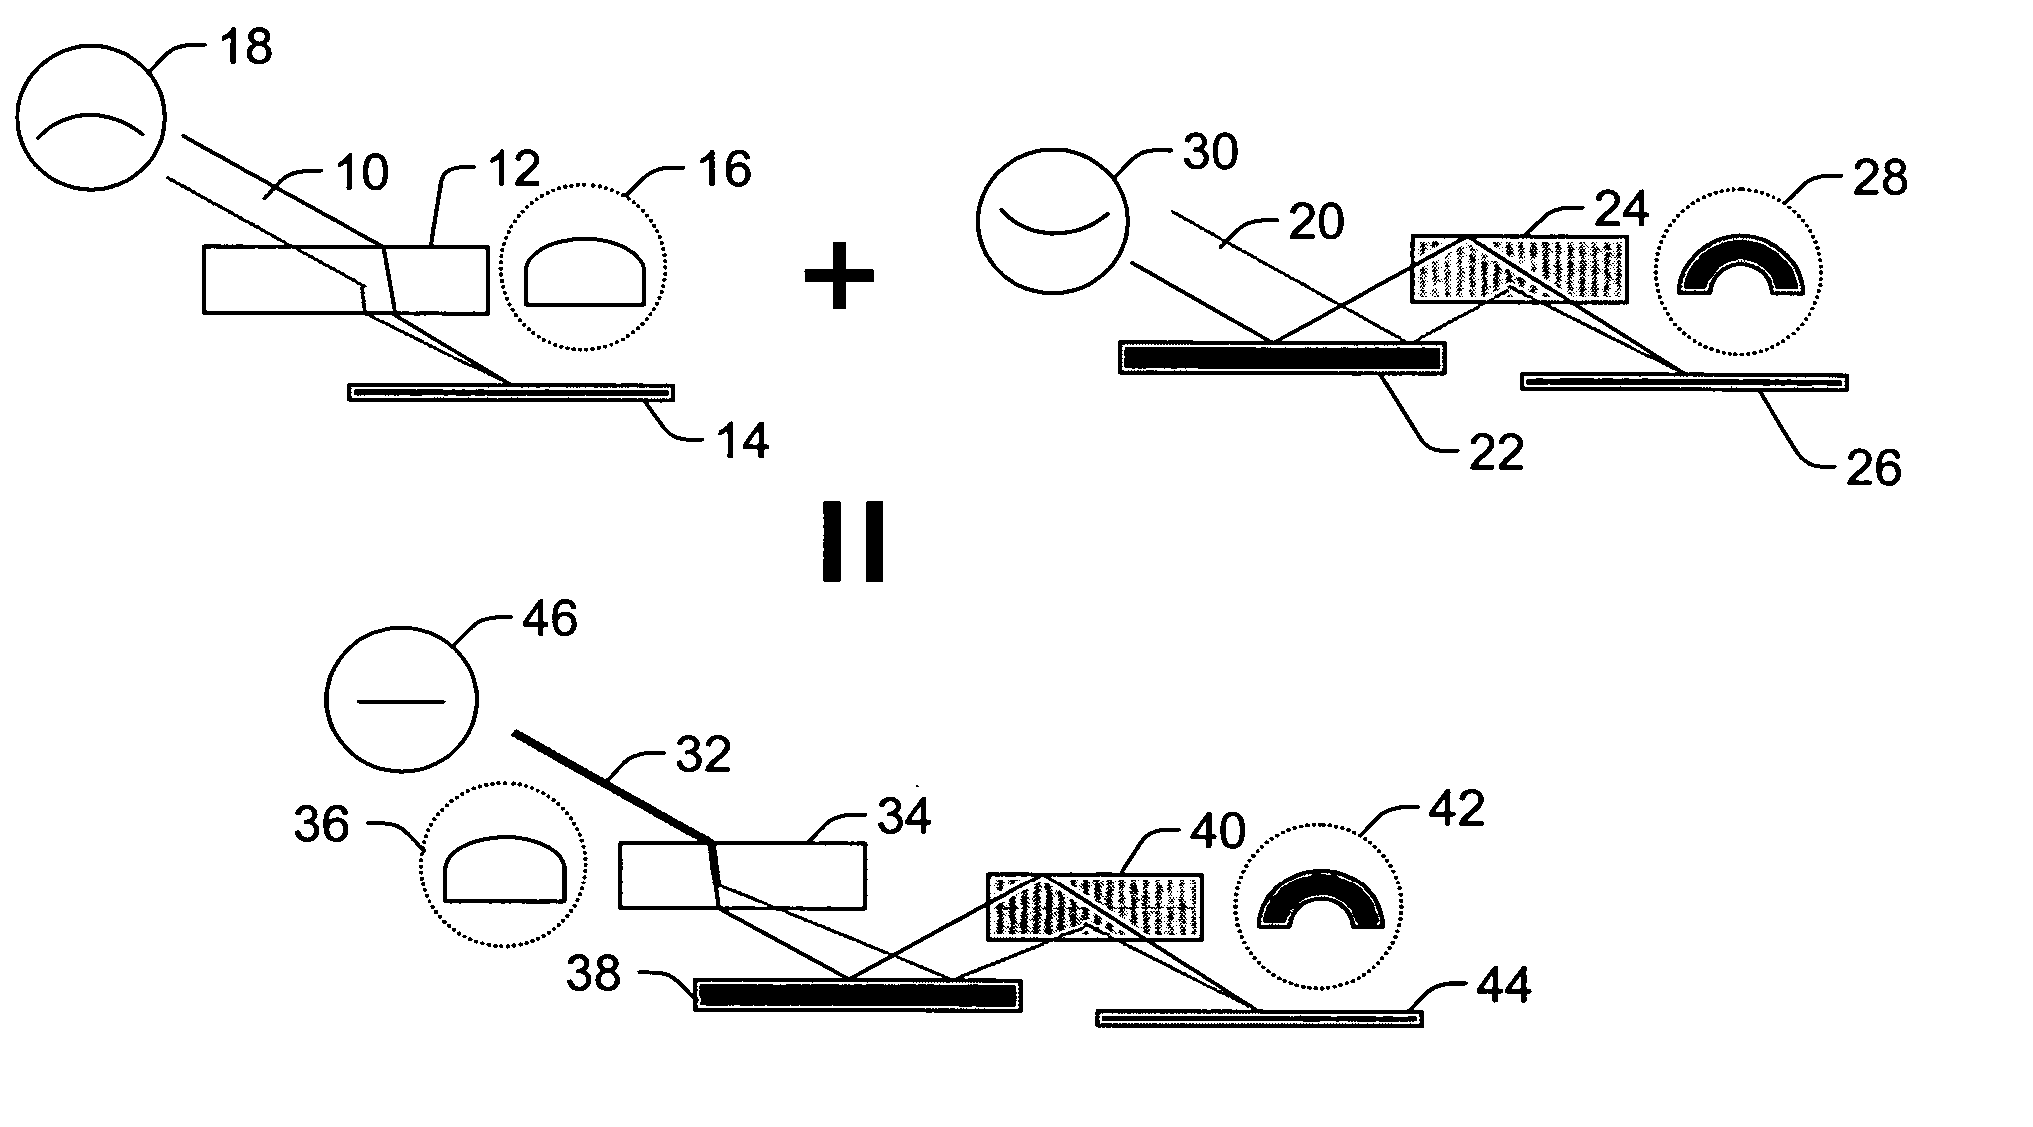 Systems configured to provide illumination of a specimen during inspection